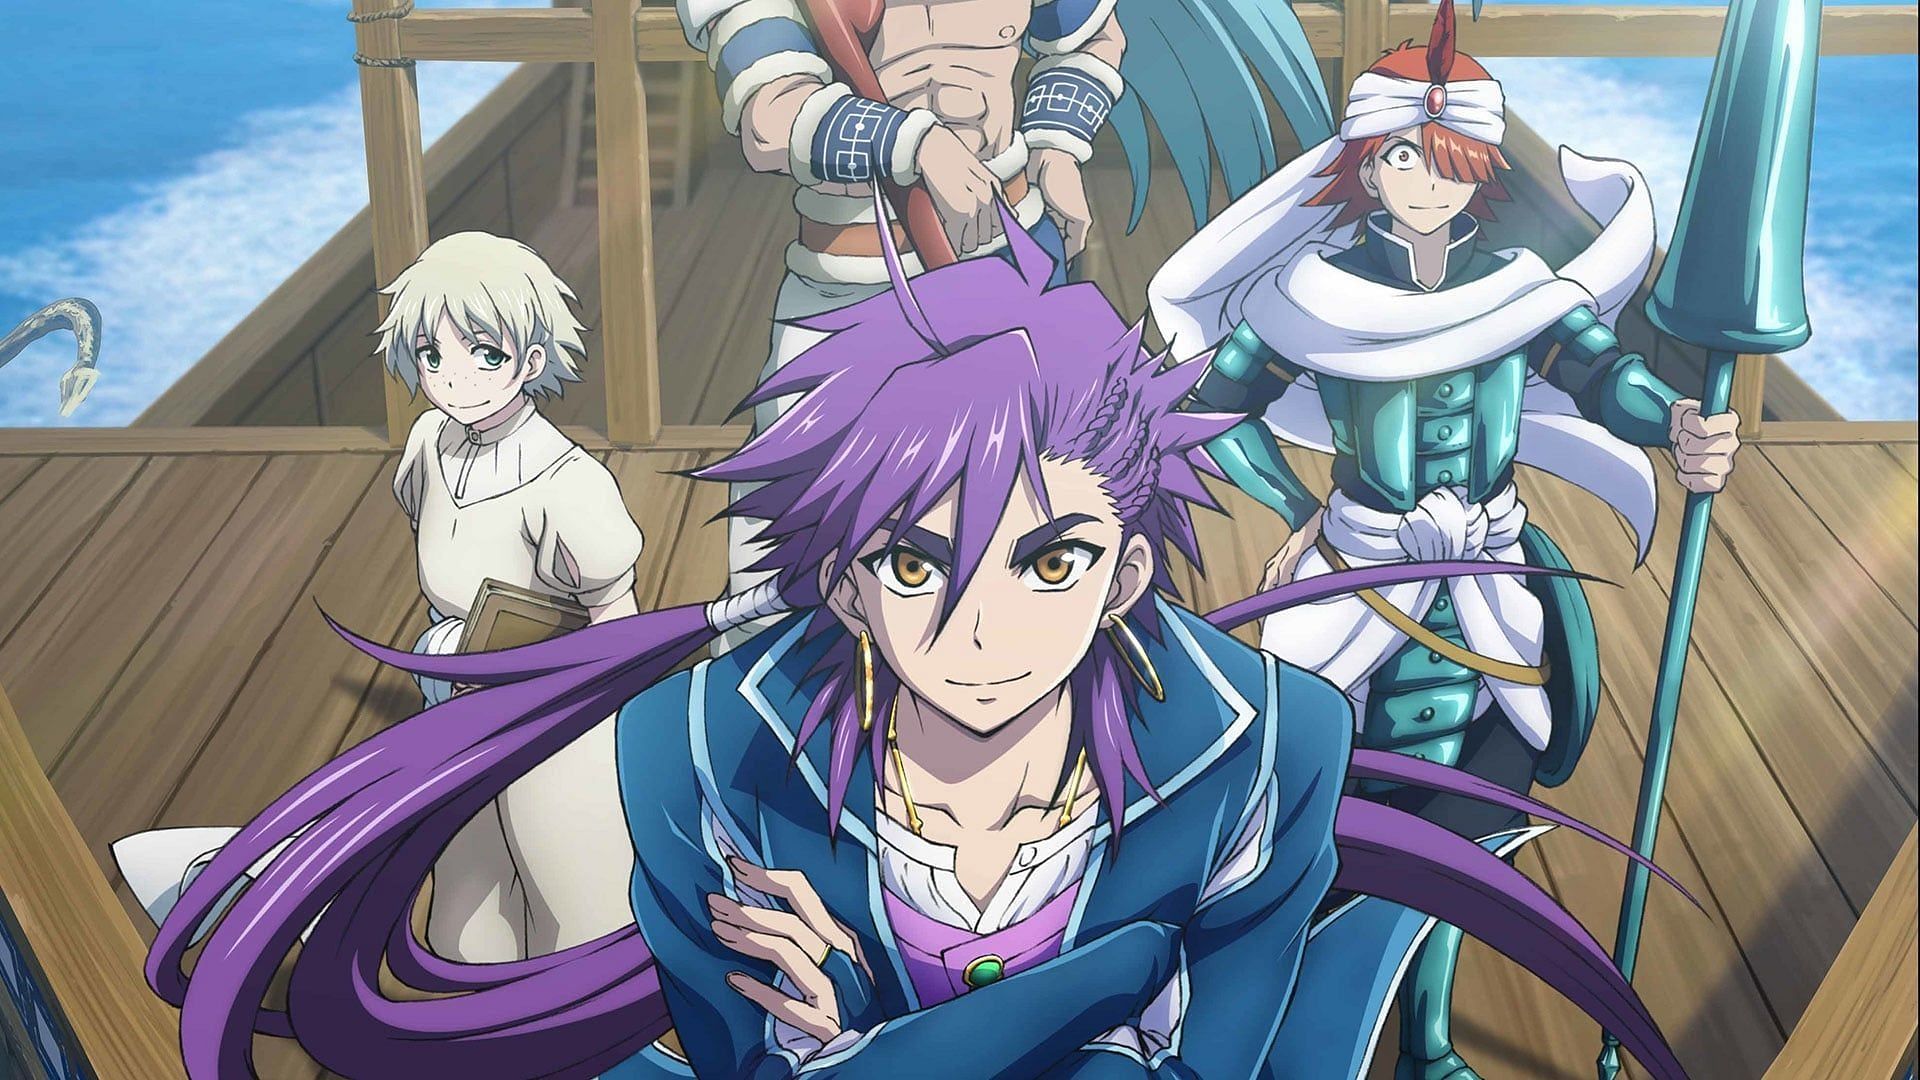 Sinbad and his friends as seen in Magi: Adventure of Sinbad (Image via Lay-duce)